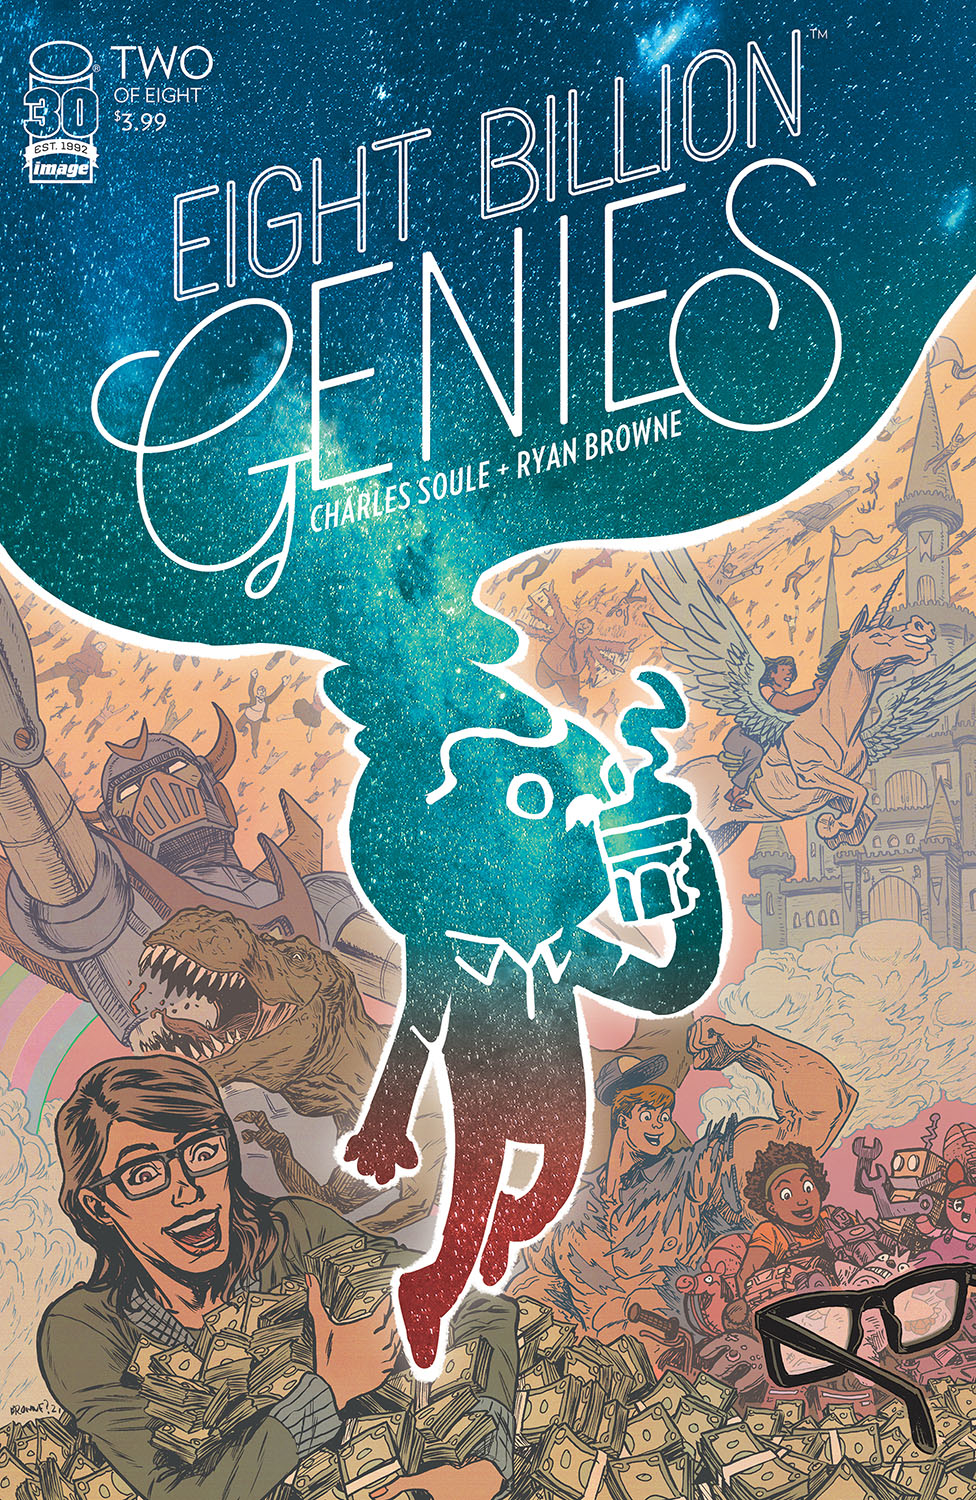 Eight Billion Genies #2 Cover A Browne (Mature) (Of 8)